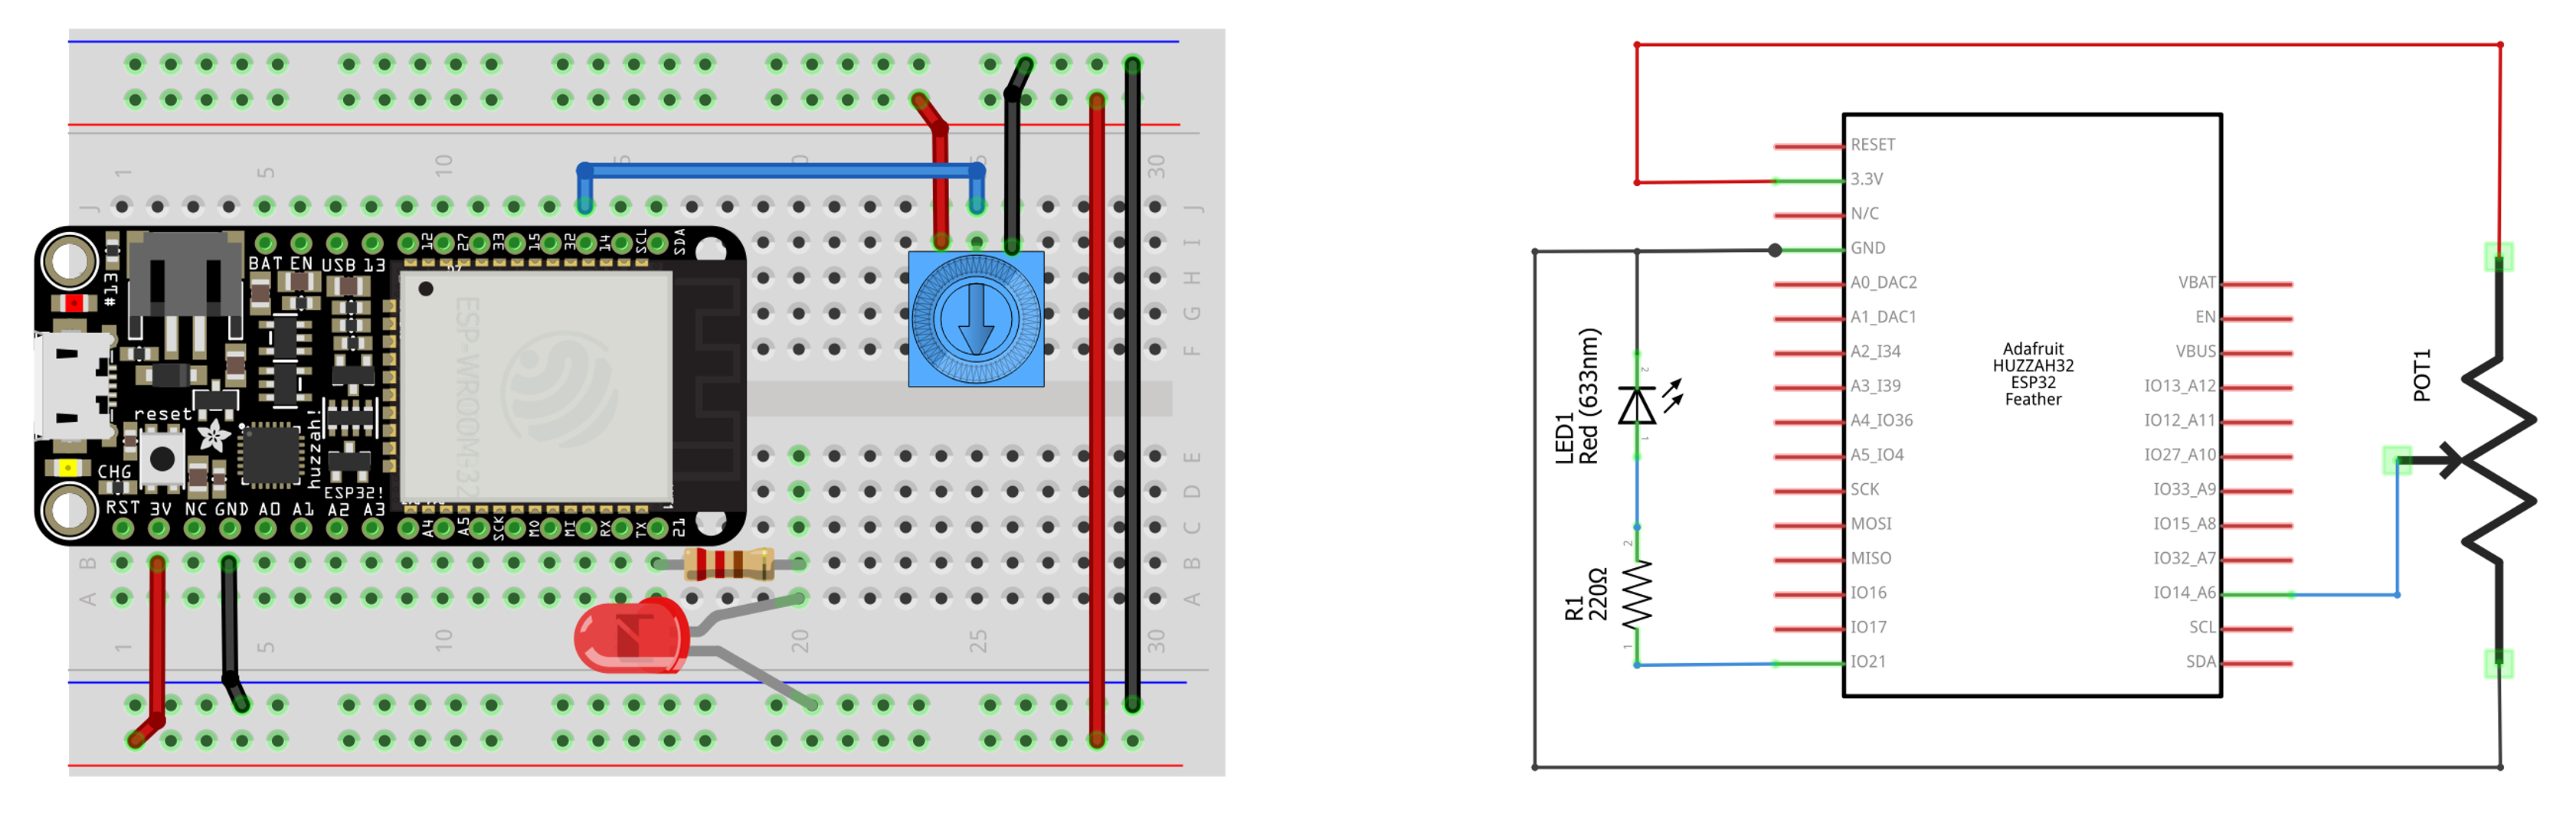 Circuit diagram and schematic for potentiometer-based fader